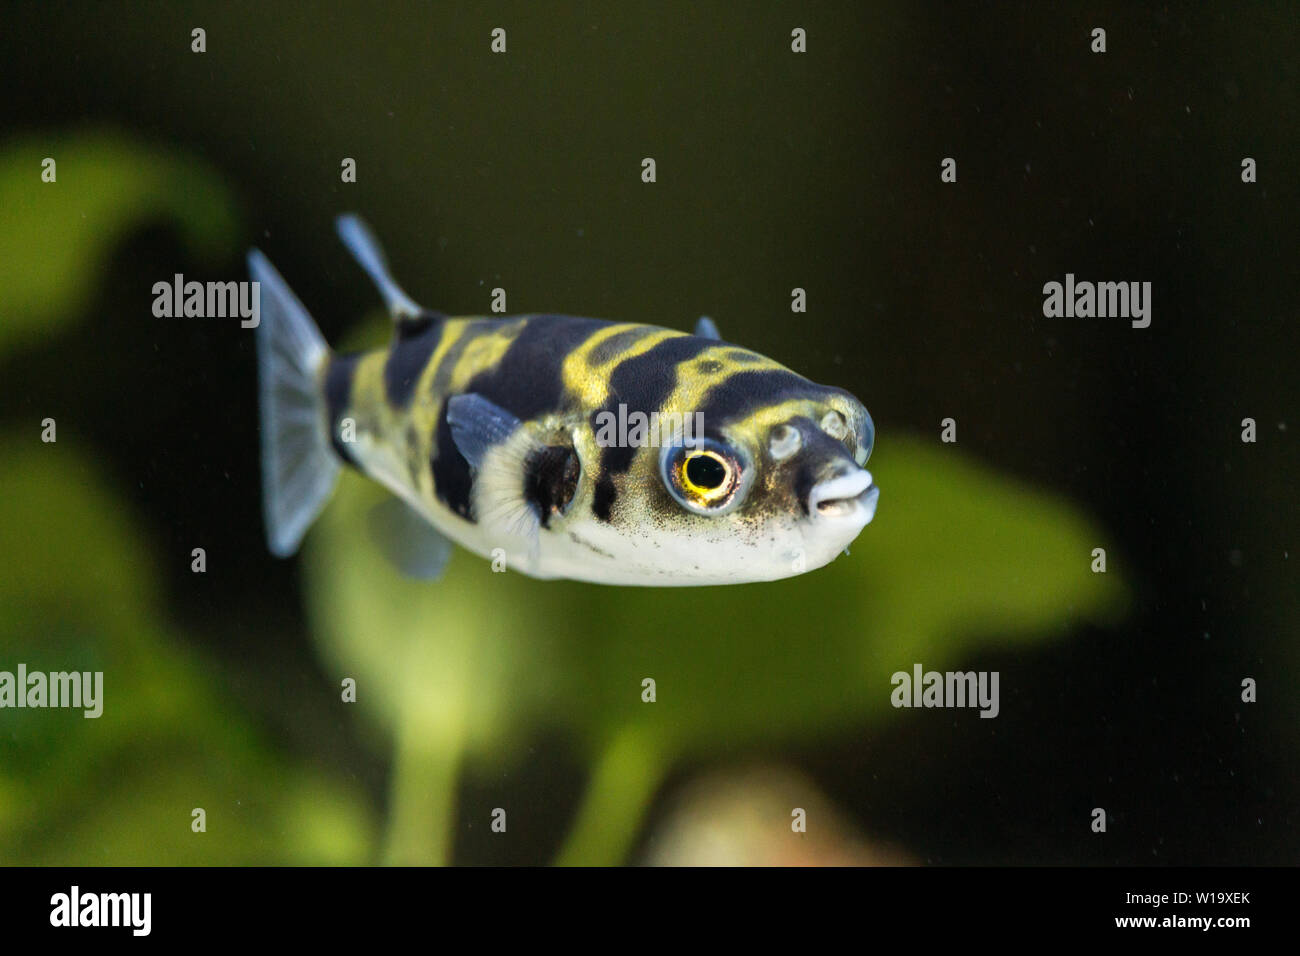 Amazonian Fish High Resolution Stock Photography and Images - Alamy